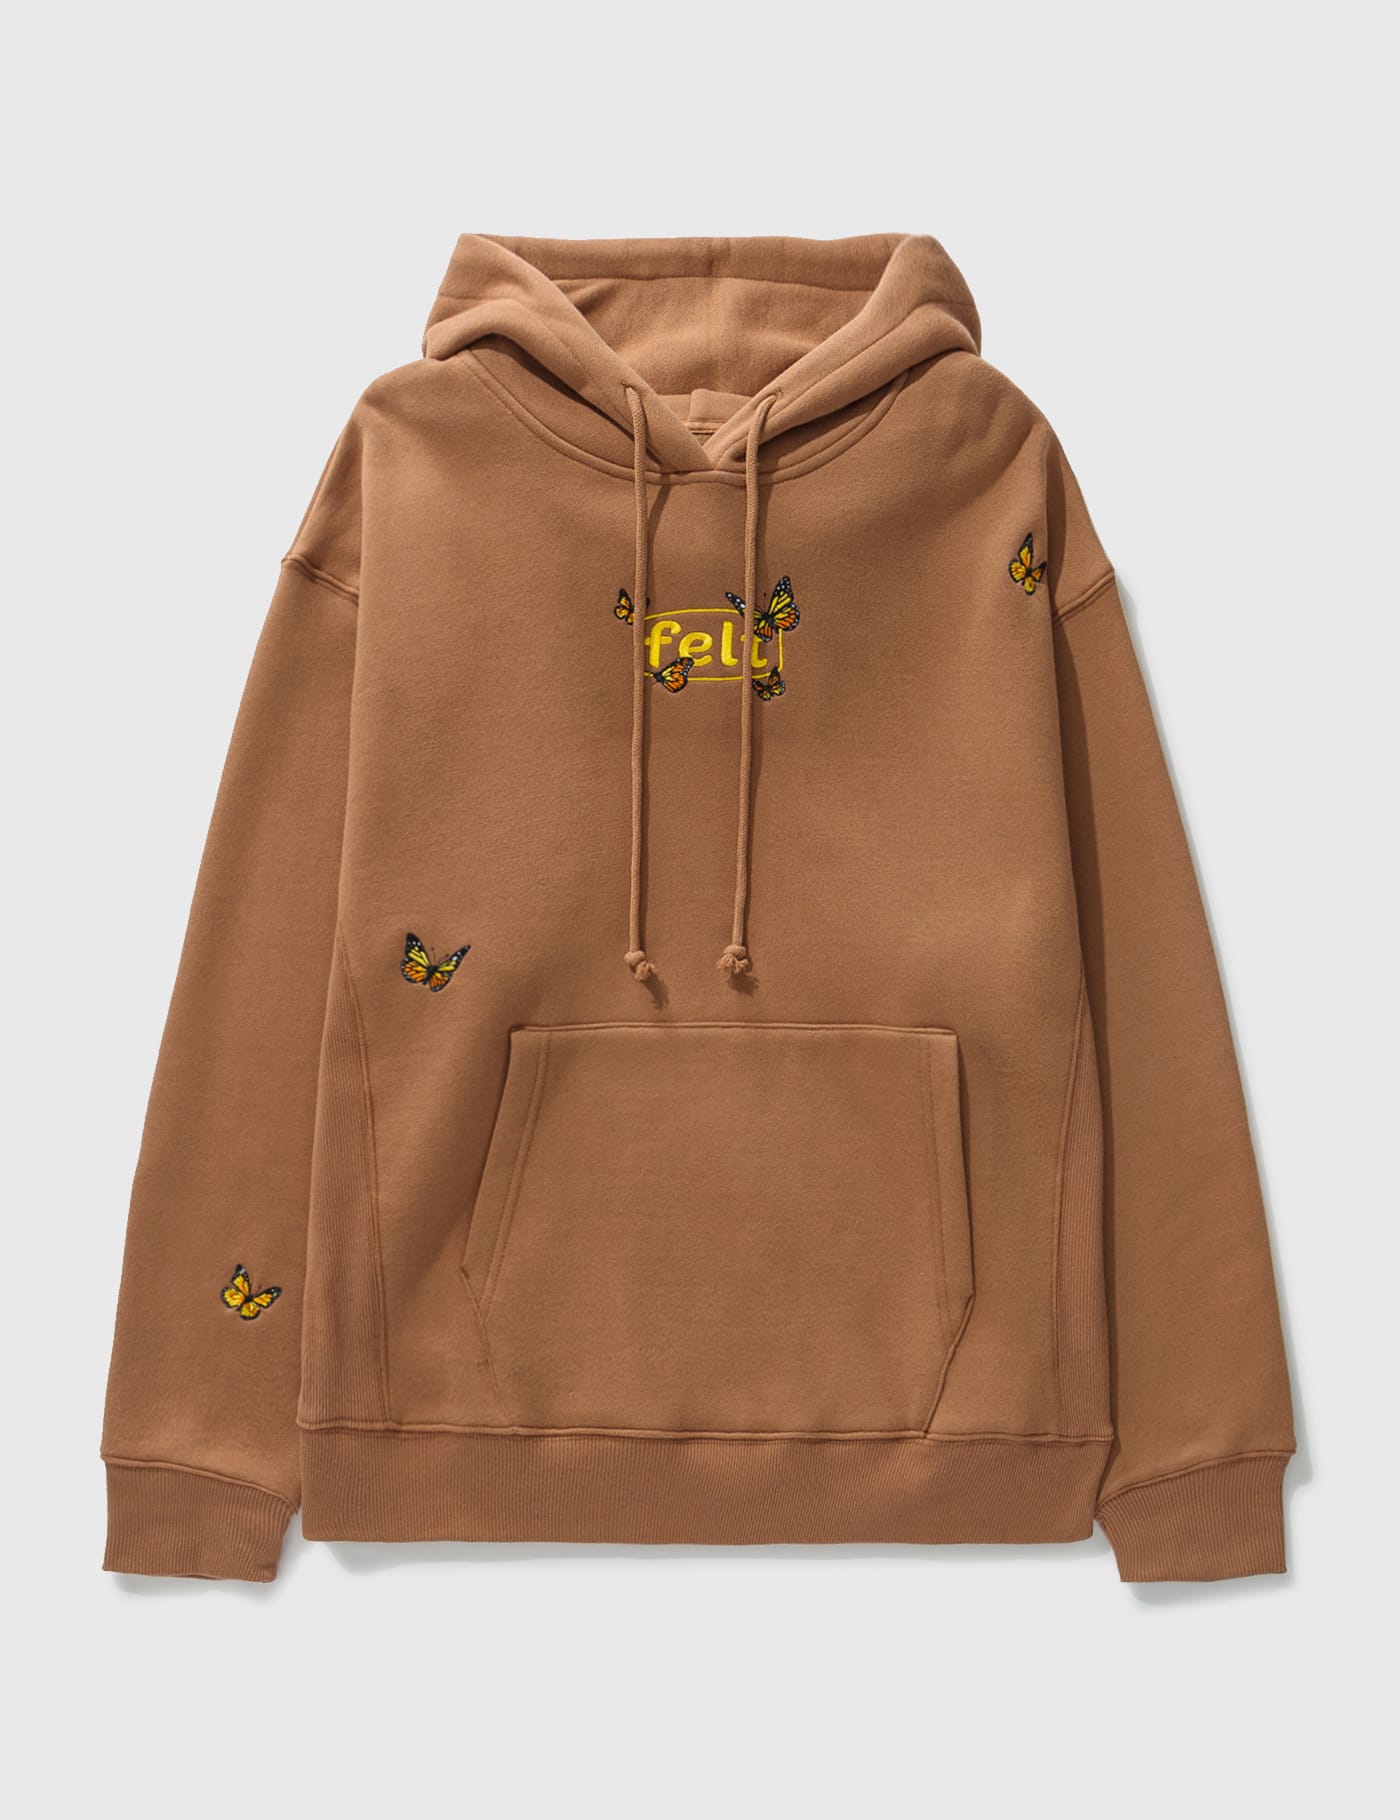 Felt - BUTTERFLY Garden HOODIE | HBX - Globally Curated Fashion 